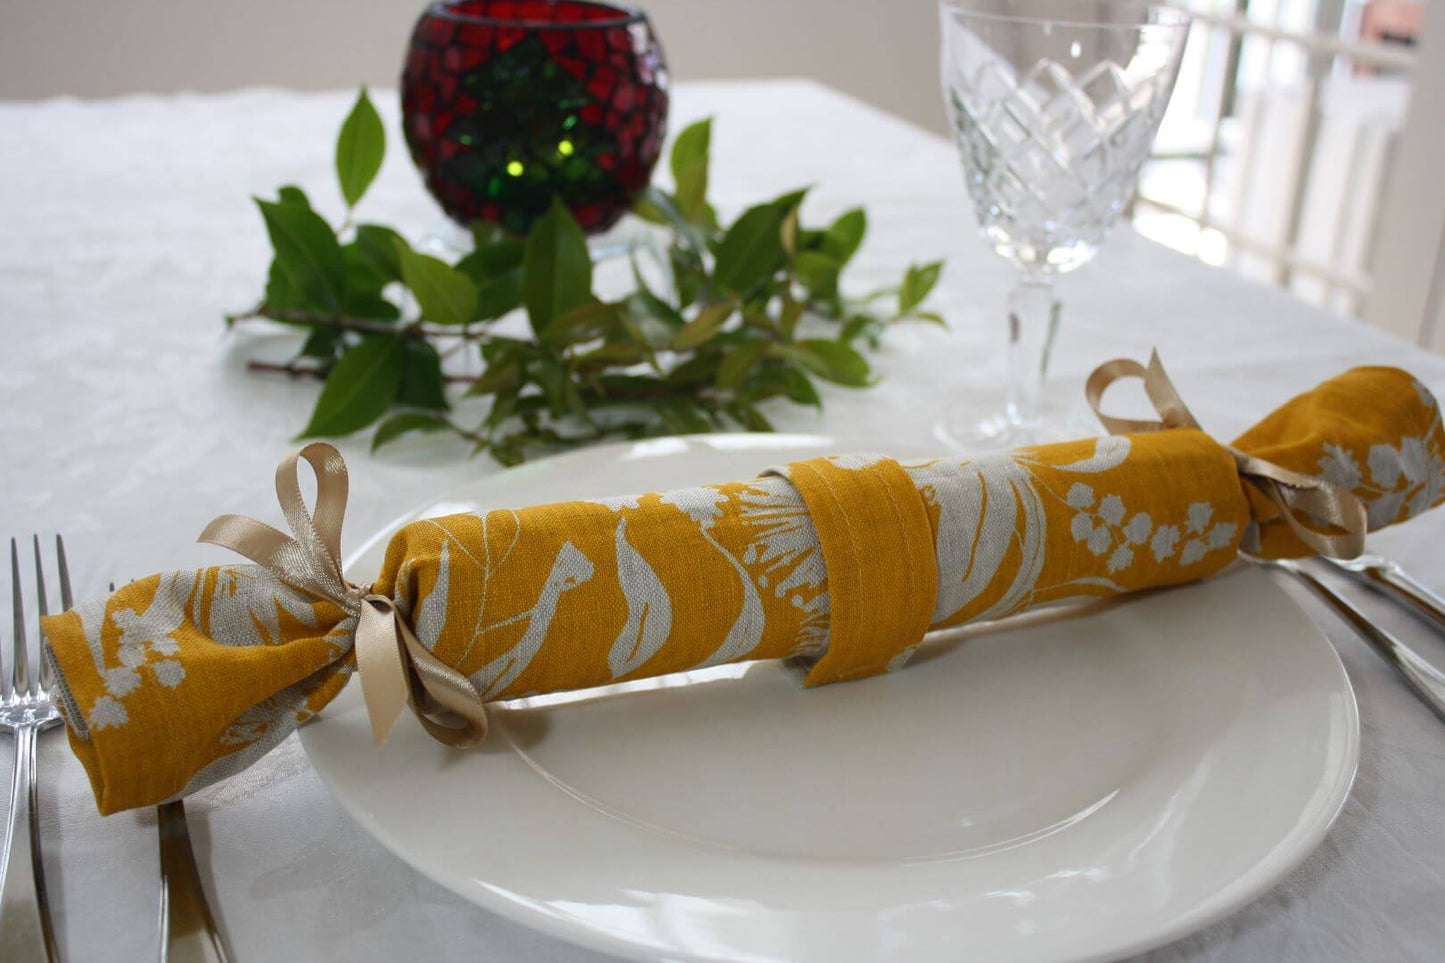 Set of 8 : Re-useable Christmas Crackers (in design of your choice)